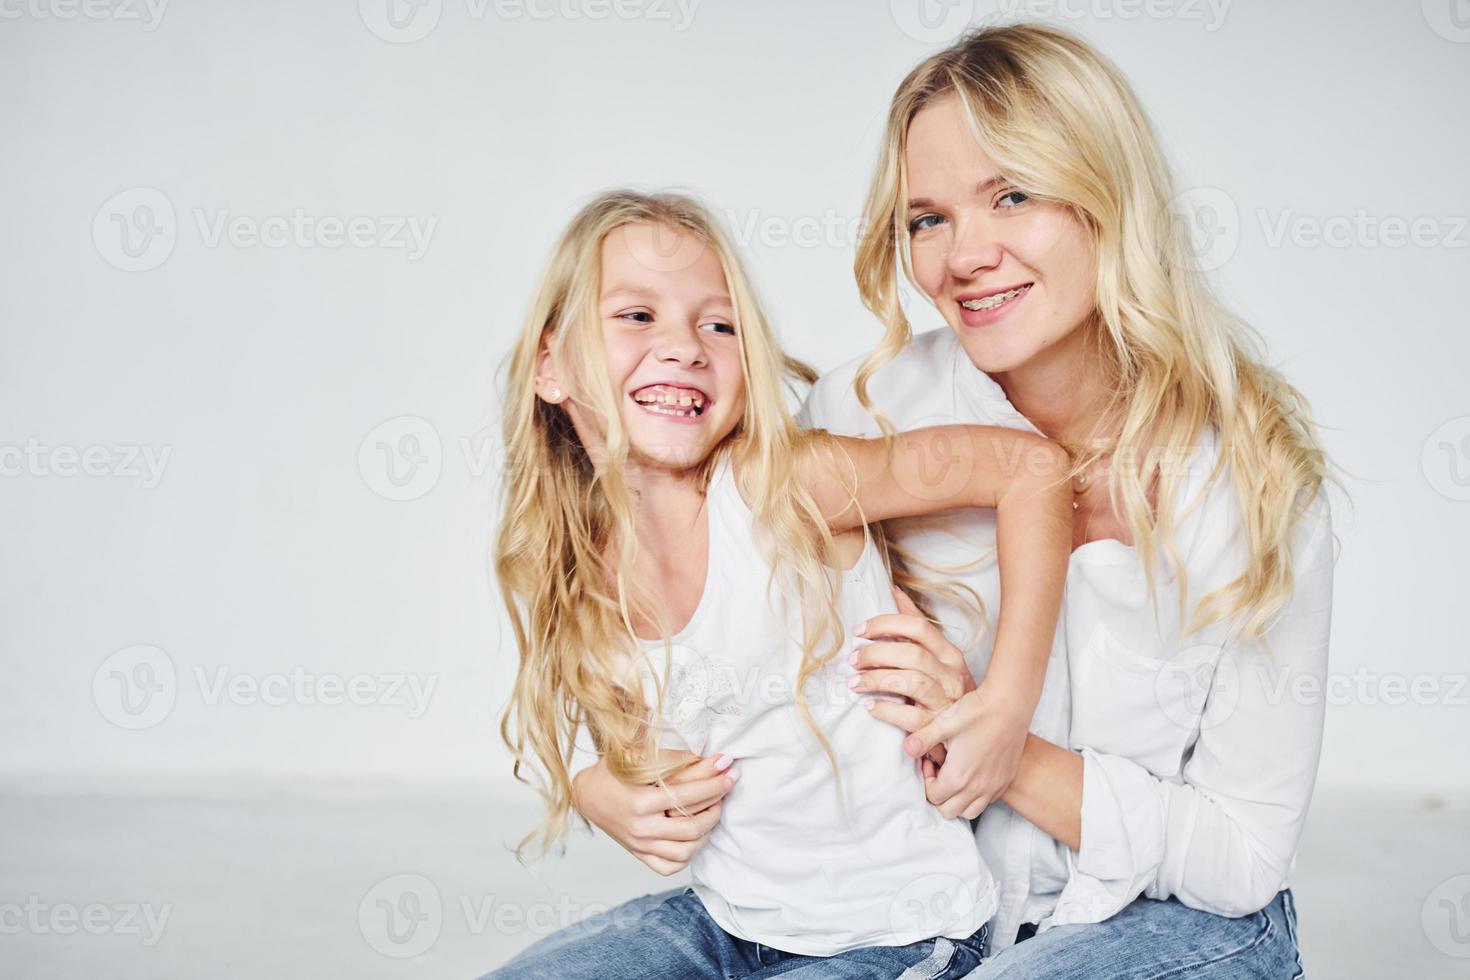 Closeness of the people. Mother with her daughter together in the studio with white background photo